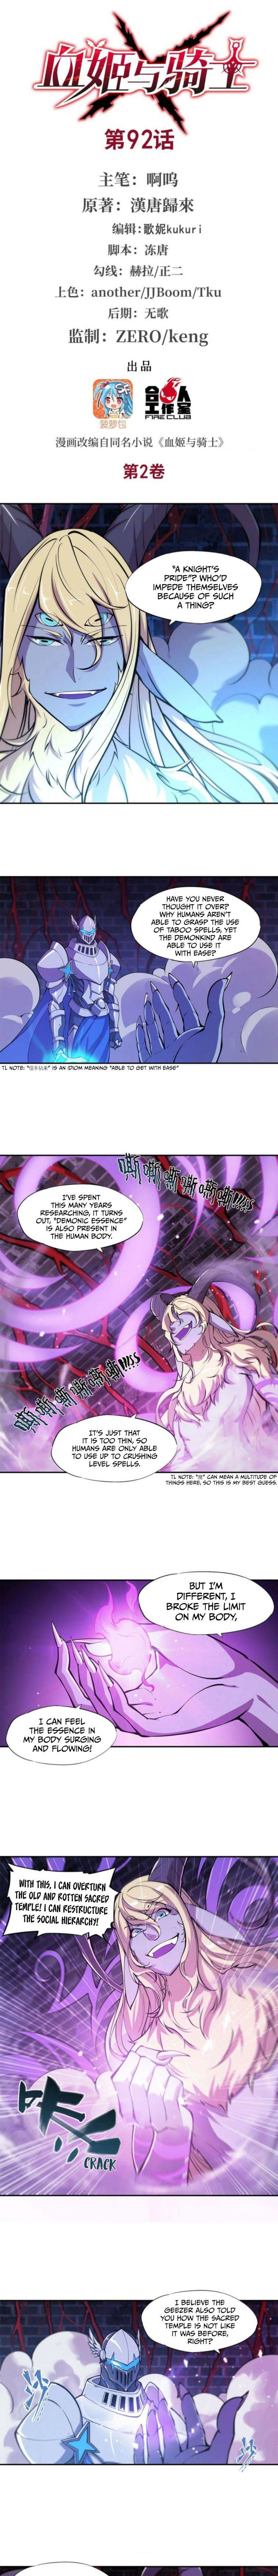 The Blood Princess and the Knight Chapter 92 page 2